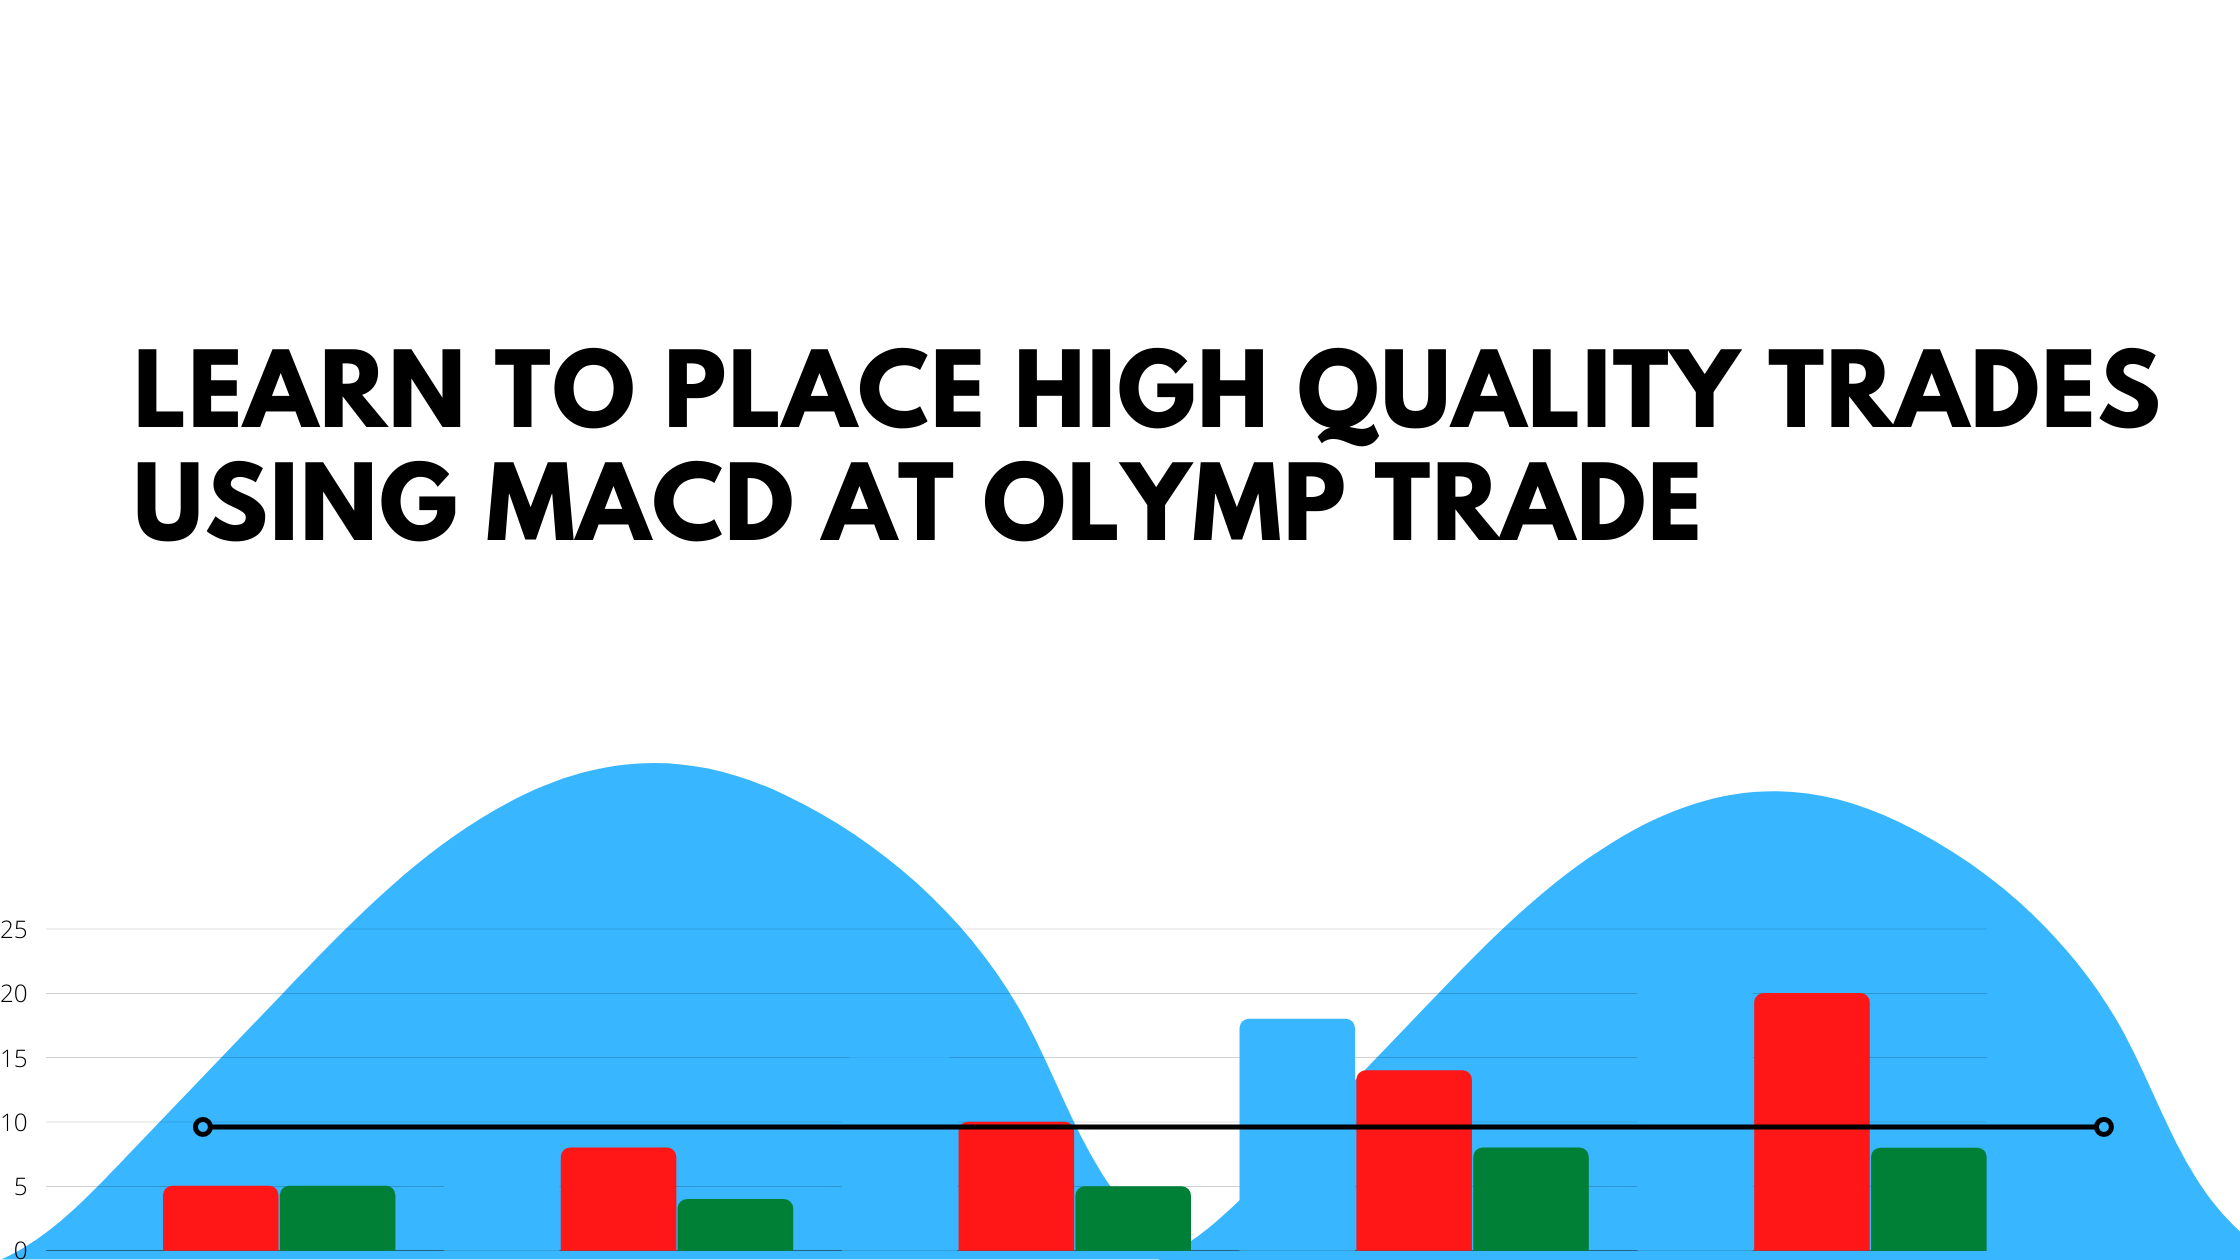 Learn to place high quality trades using MACD at Olymp Trade